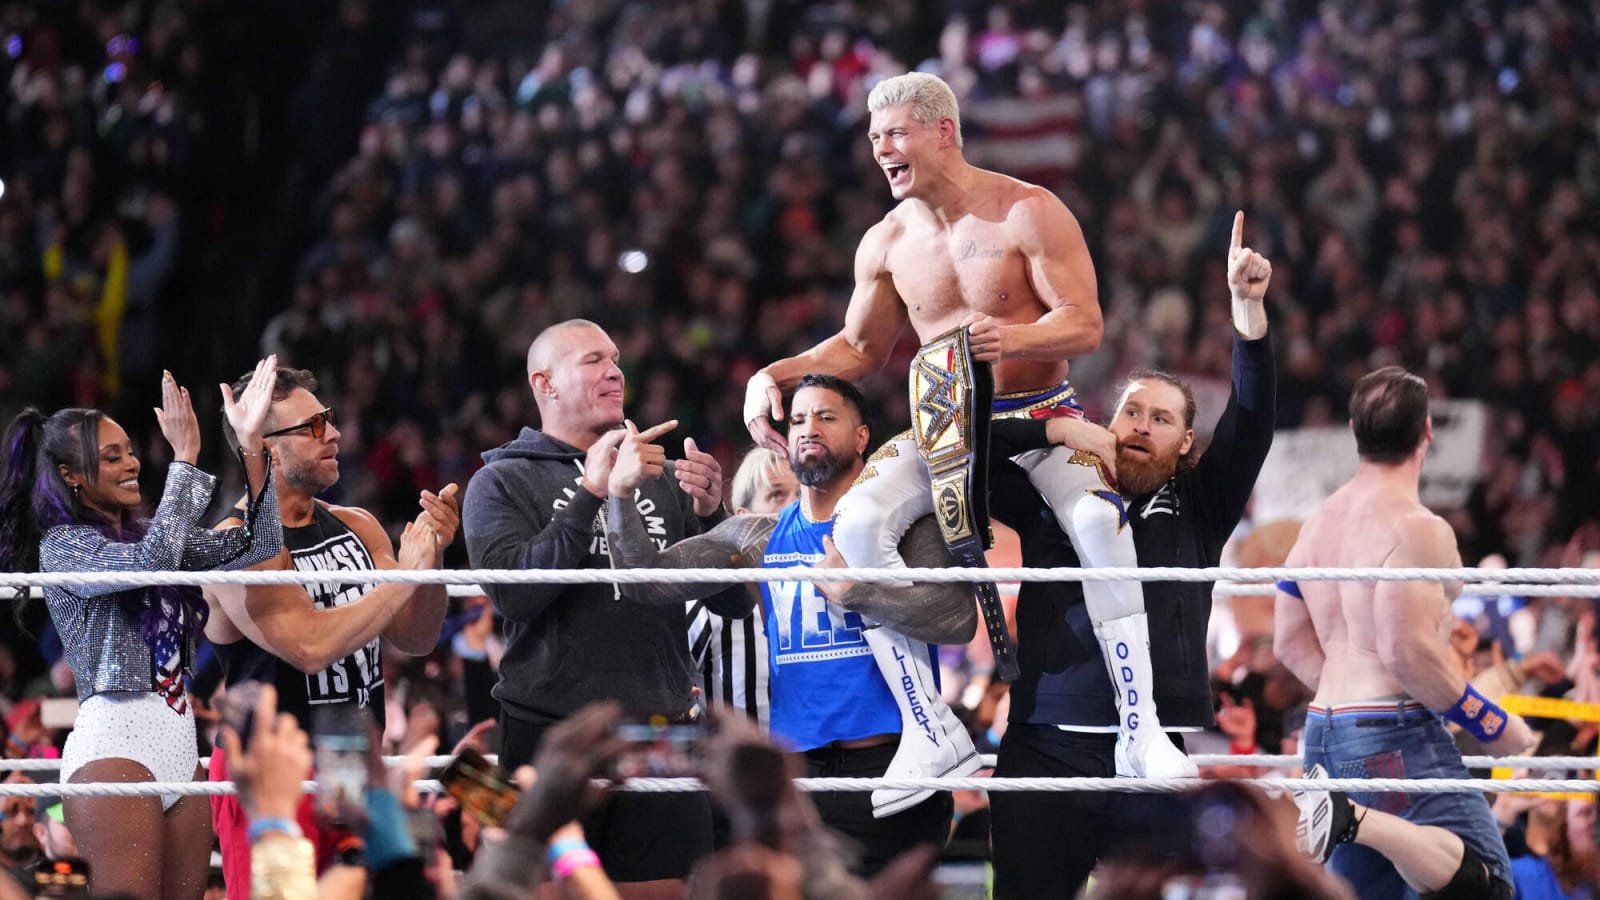 'Looked like someone shot his dog,' The Rock’s business partner reveals Cody Rhodes was supposed to have completely different reaction while giving his WrestleMania spot